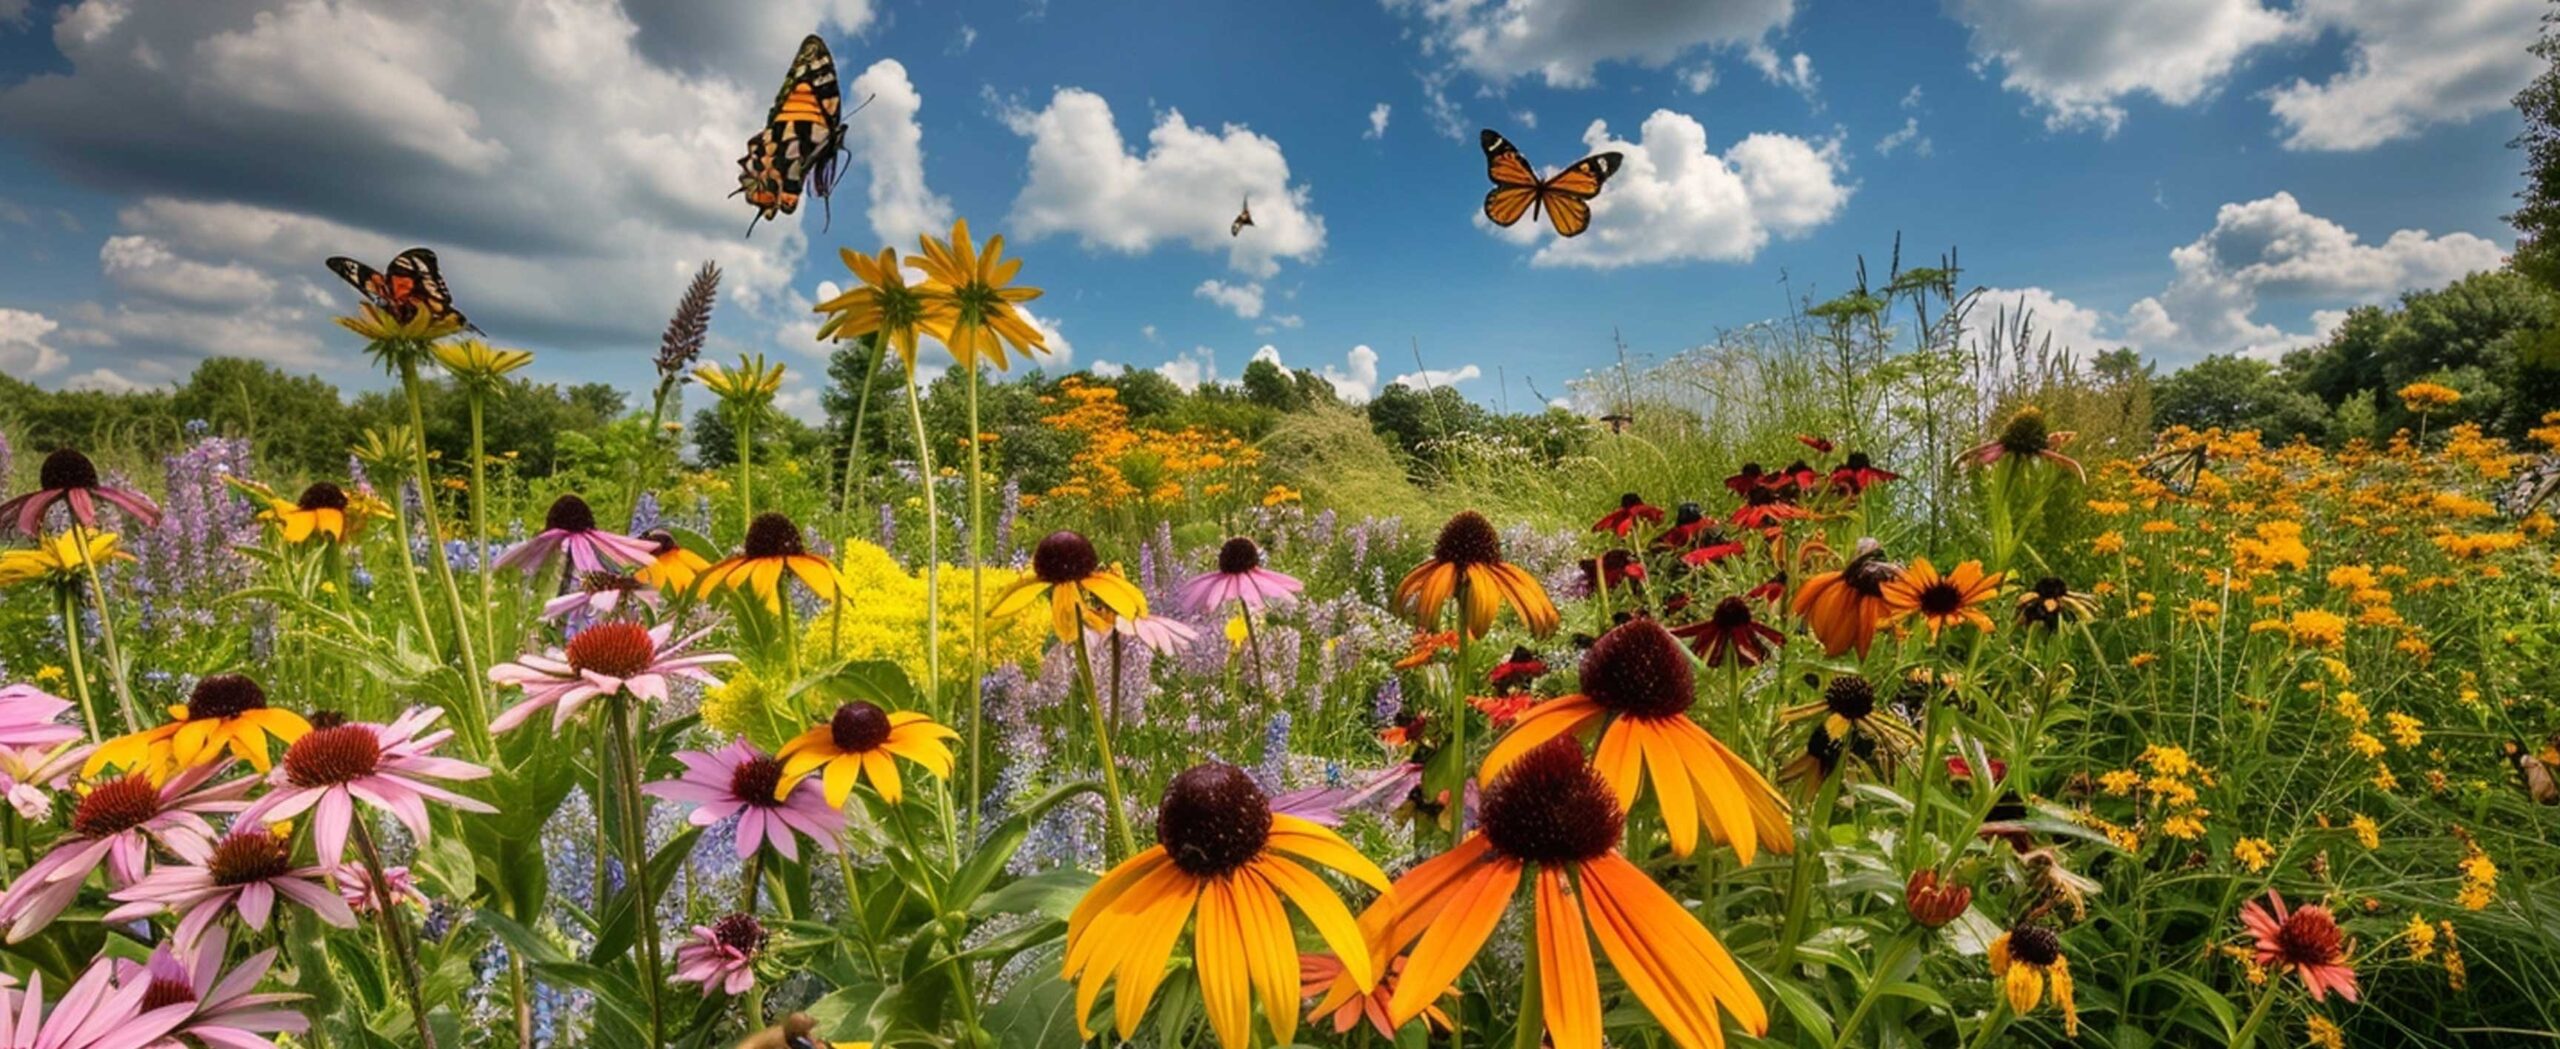 Native plants in Michigan Garden, flowers and butterflies. This is a hero image, representing native plant in Michigan.